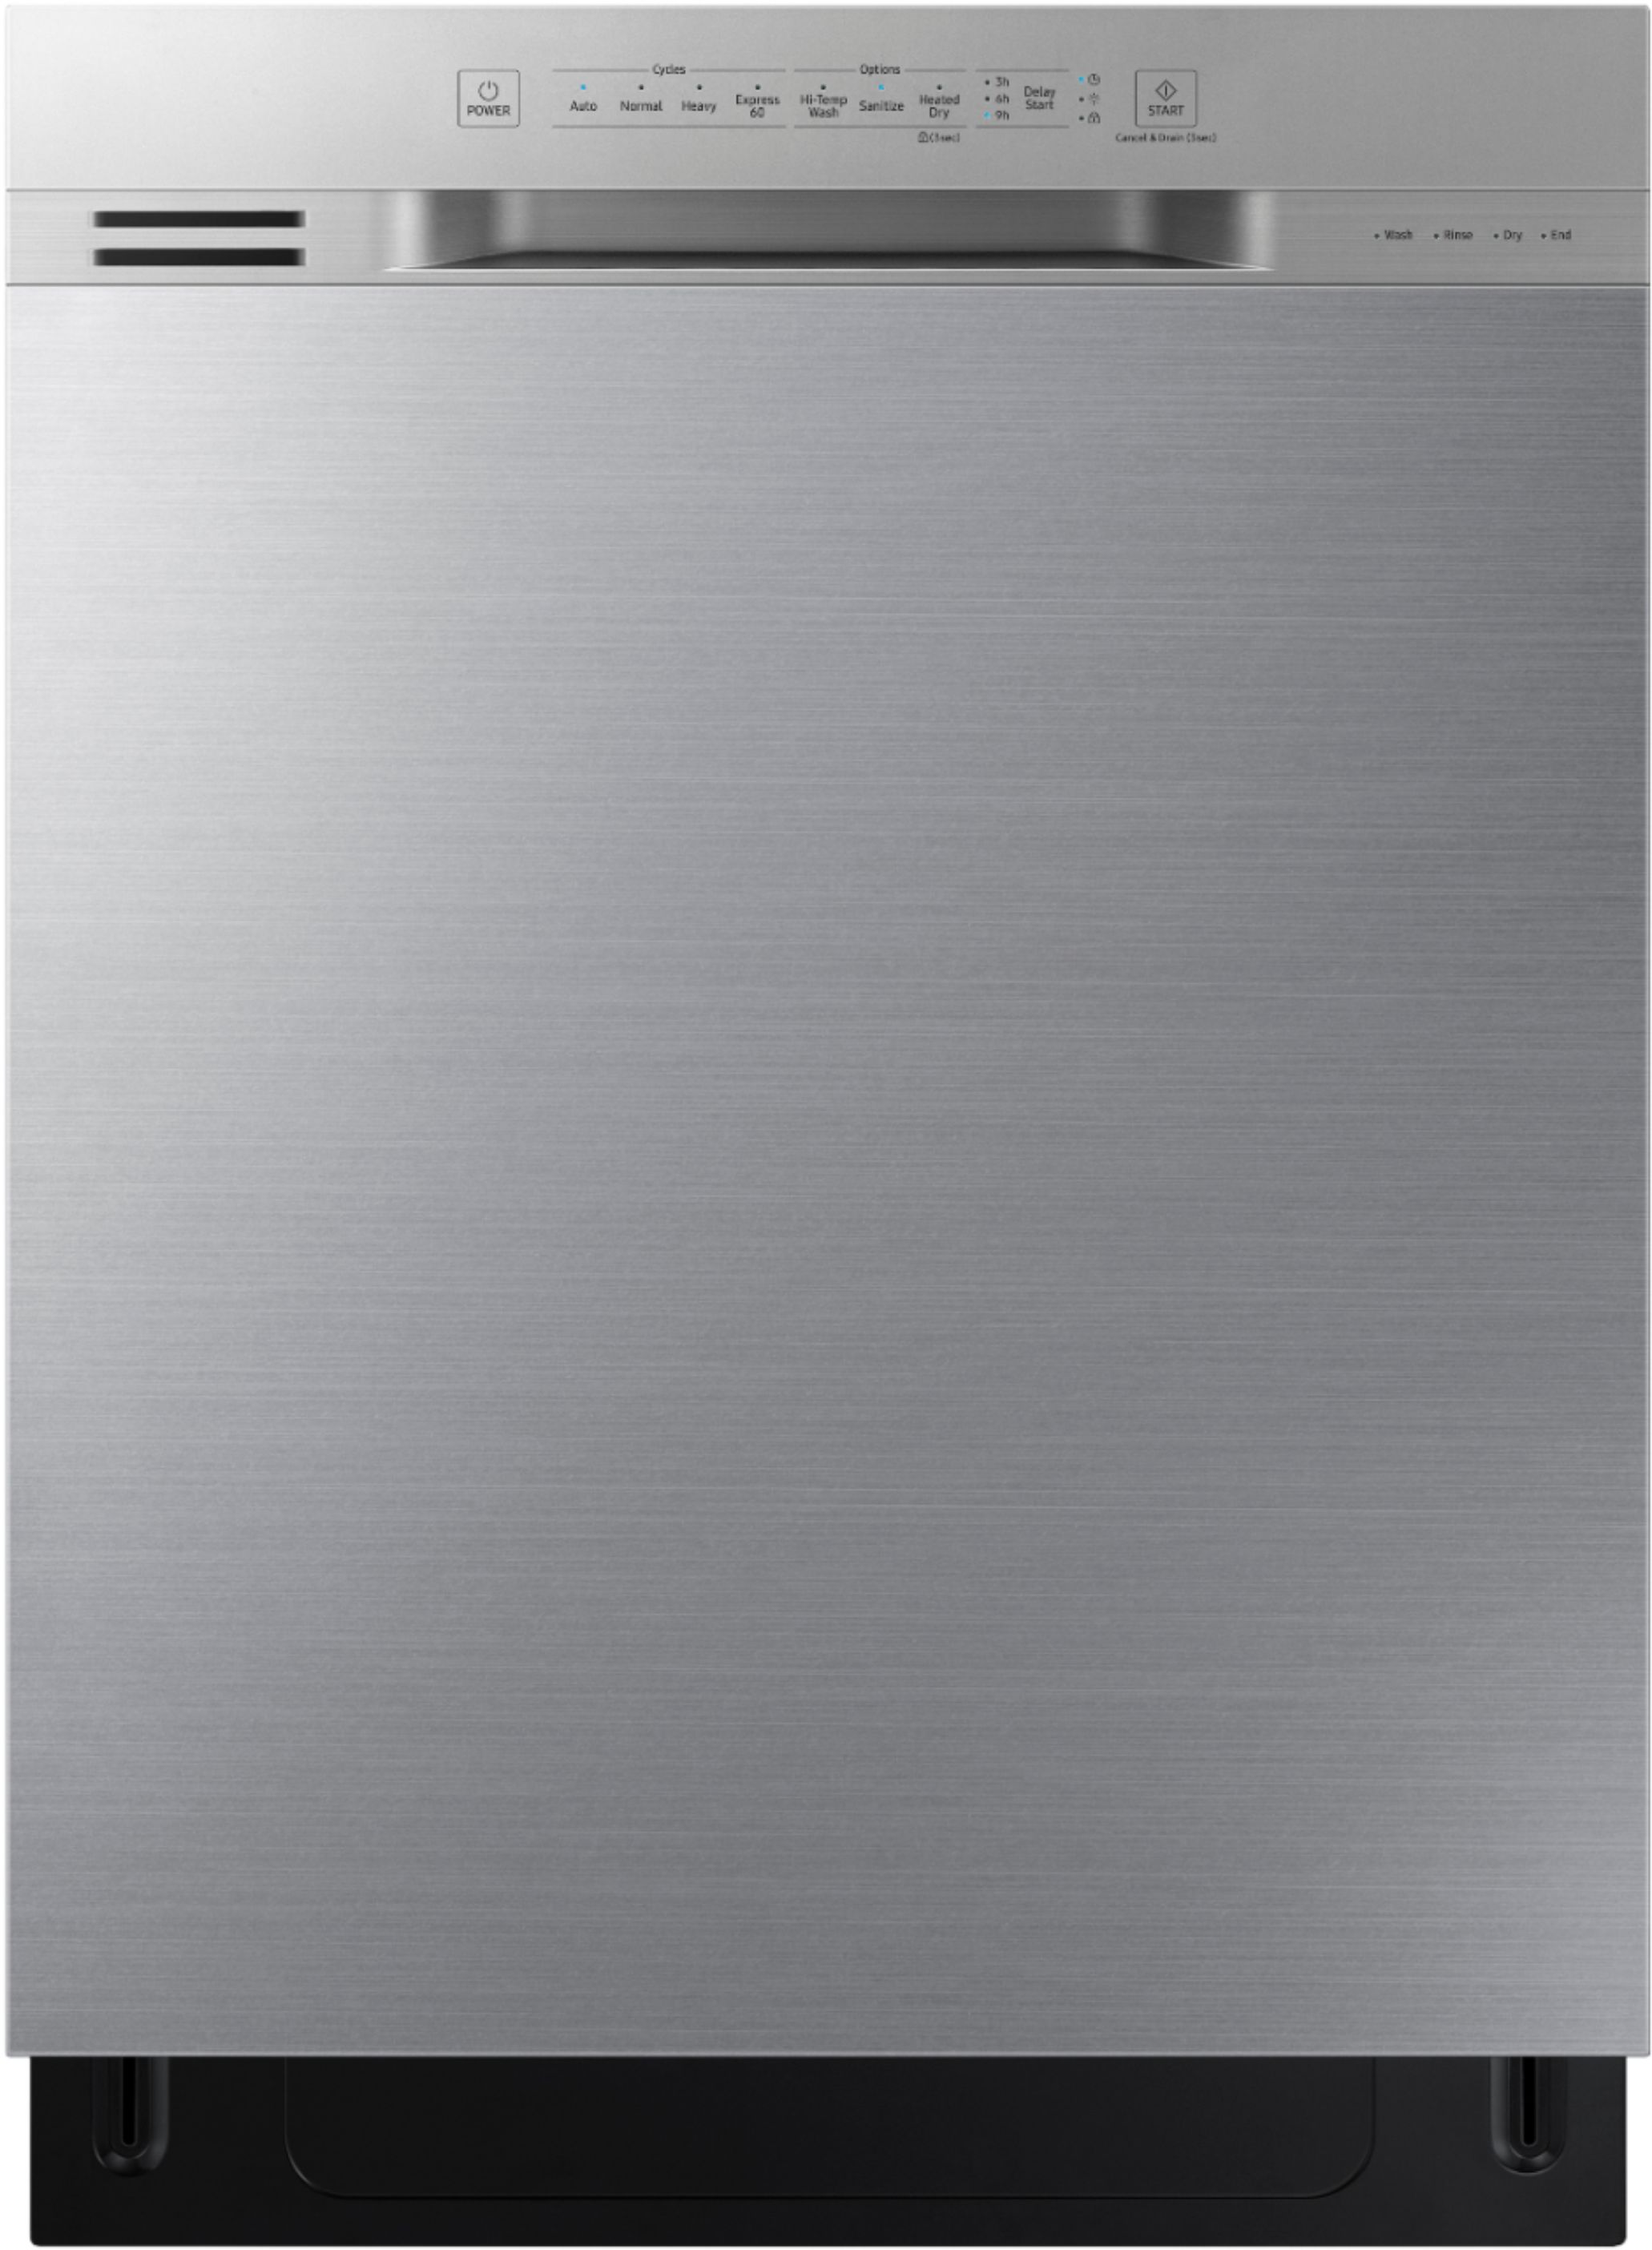 Samsung Front Control Dishwasher with Hybrid Interior - Stainless Steel